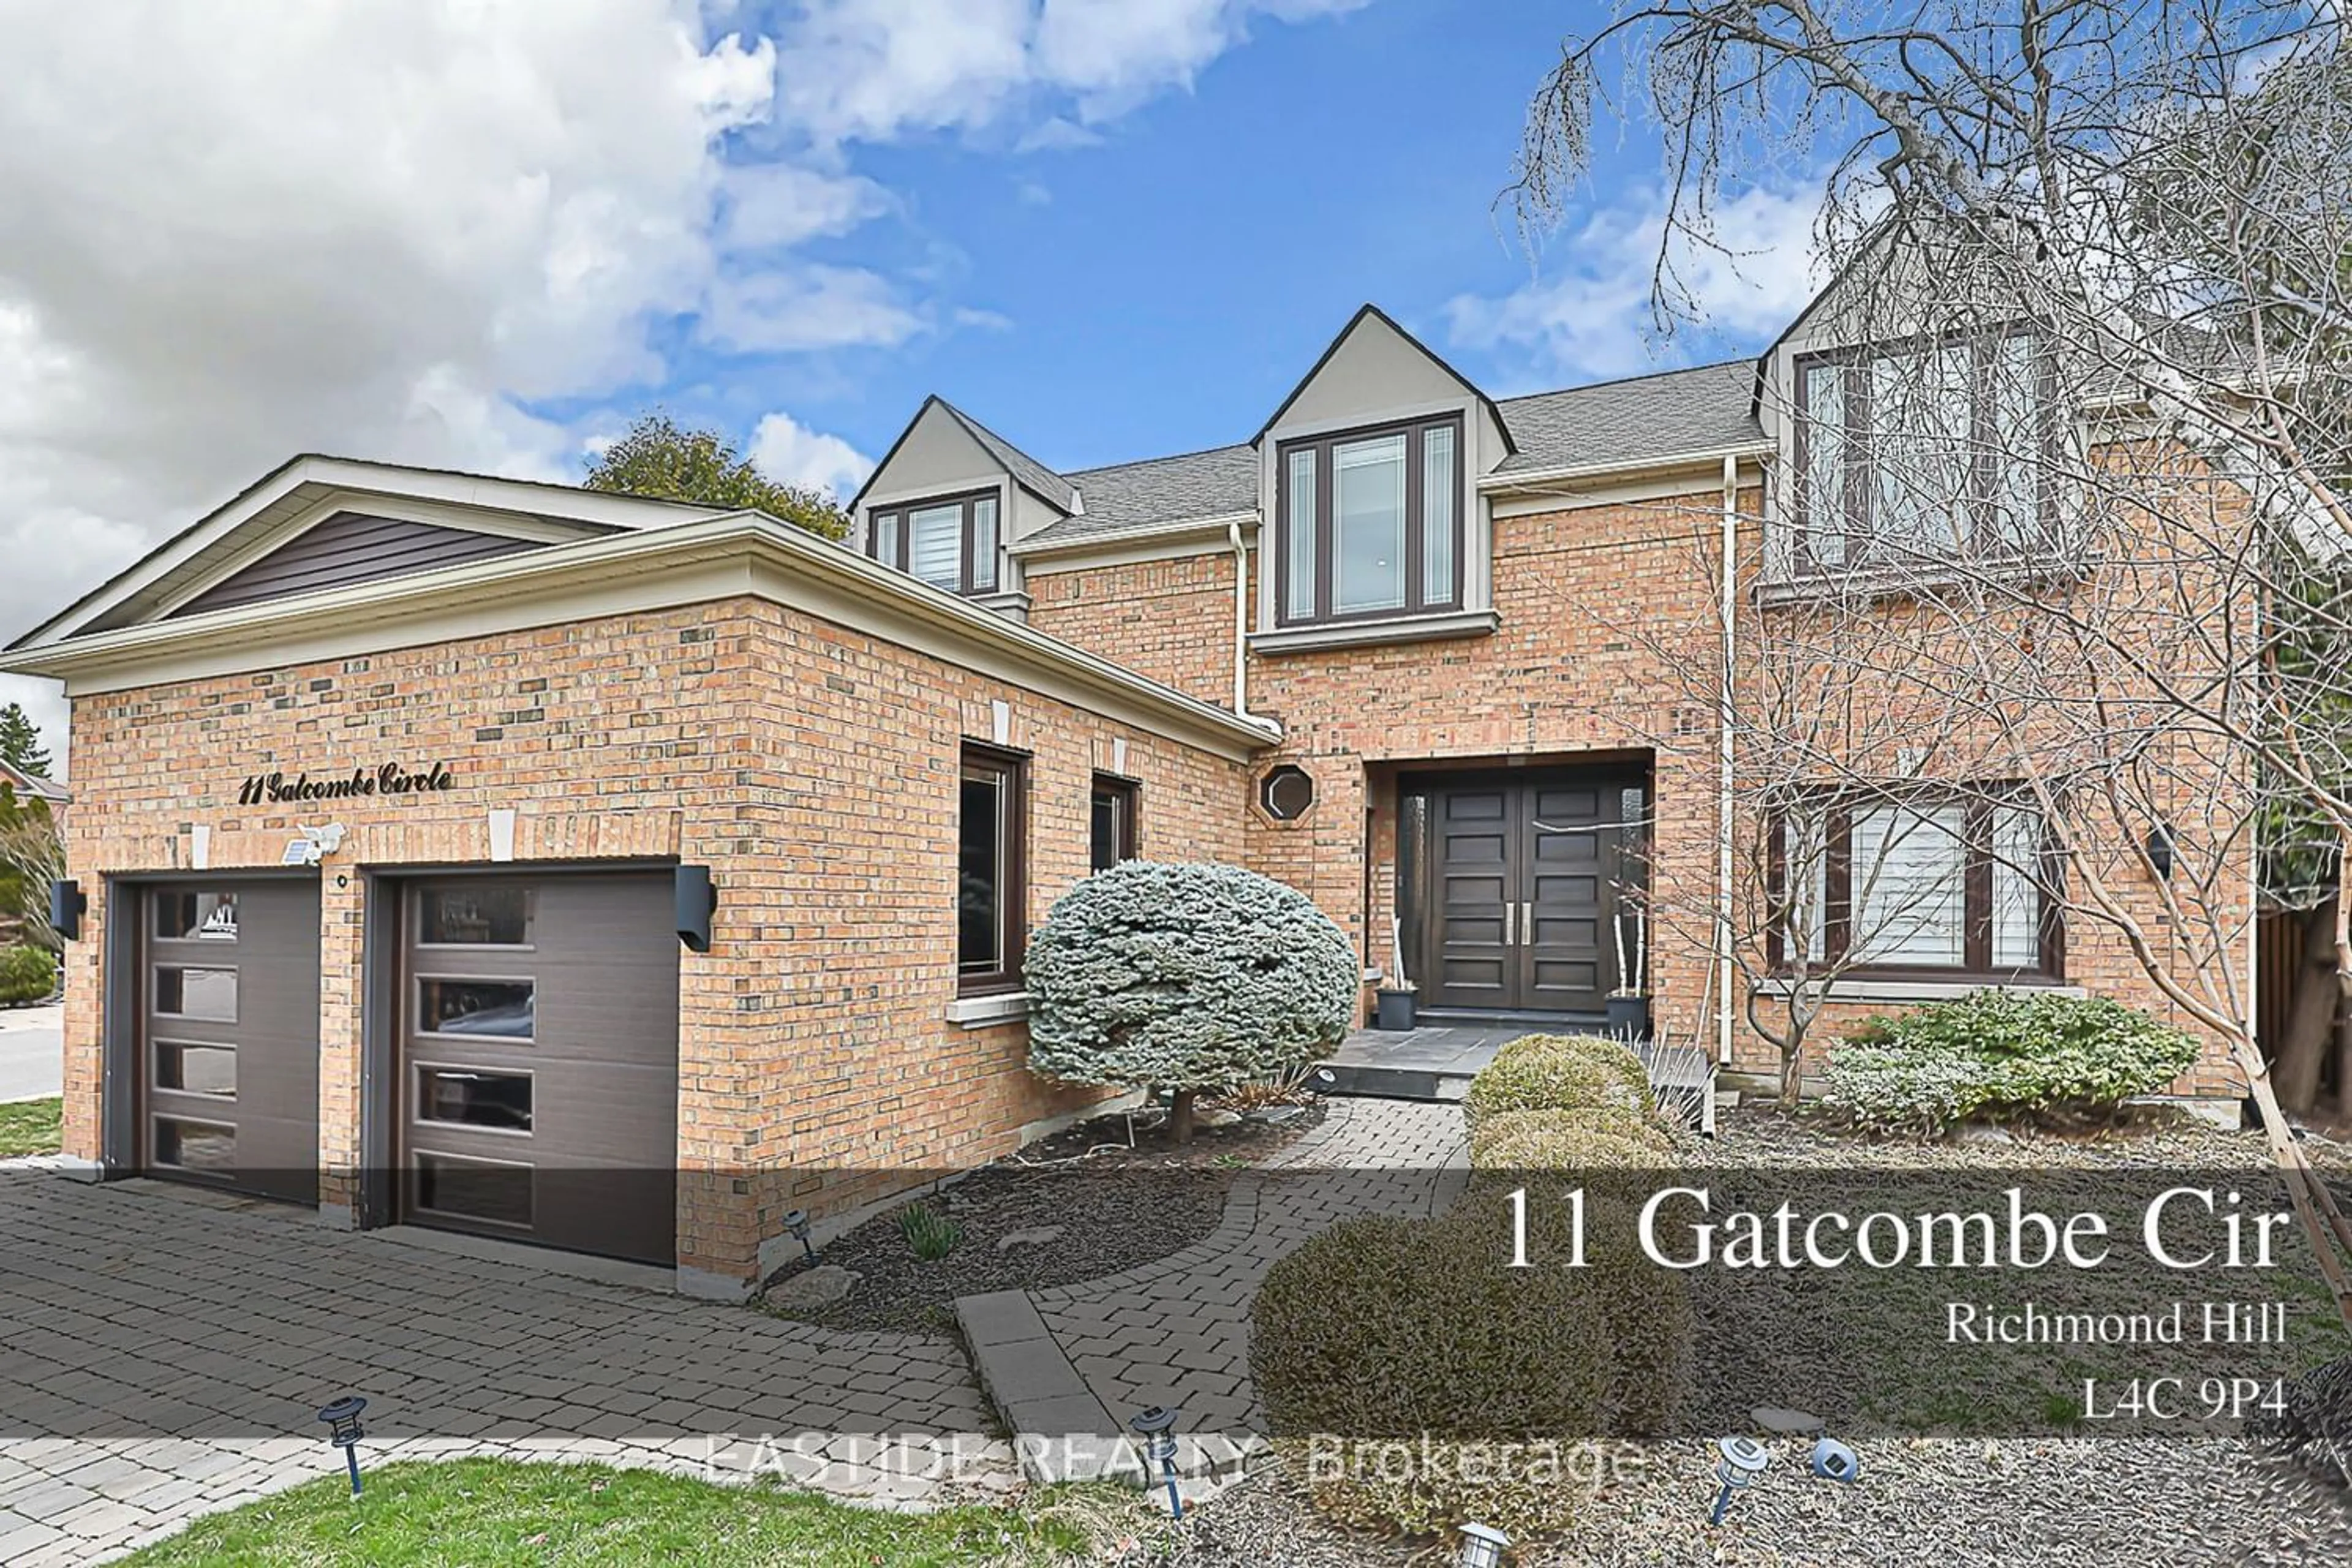 Home with brick exterior material for 11 Gatcombe Circ, Richmond Hill Ontario L4C 9P4